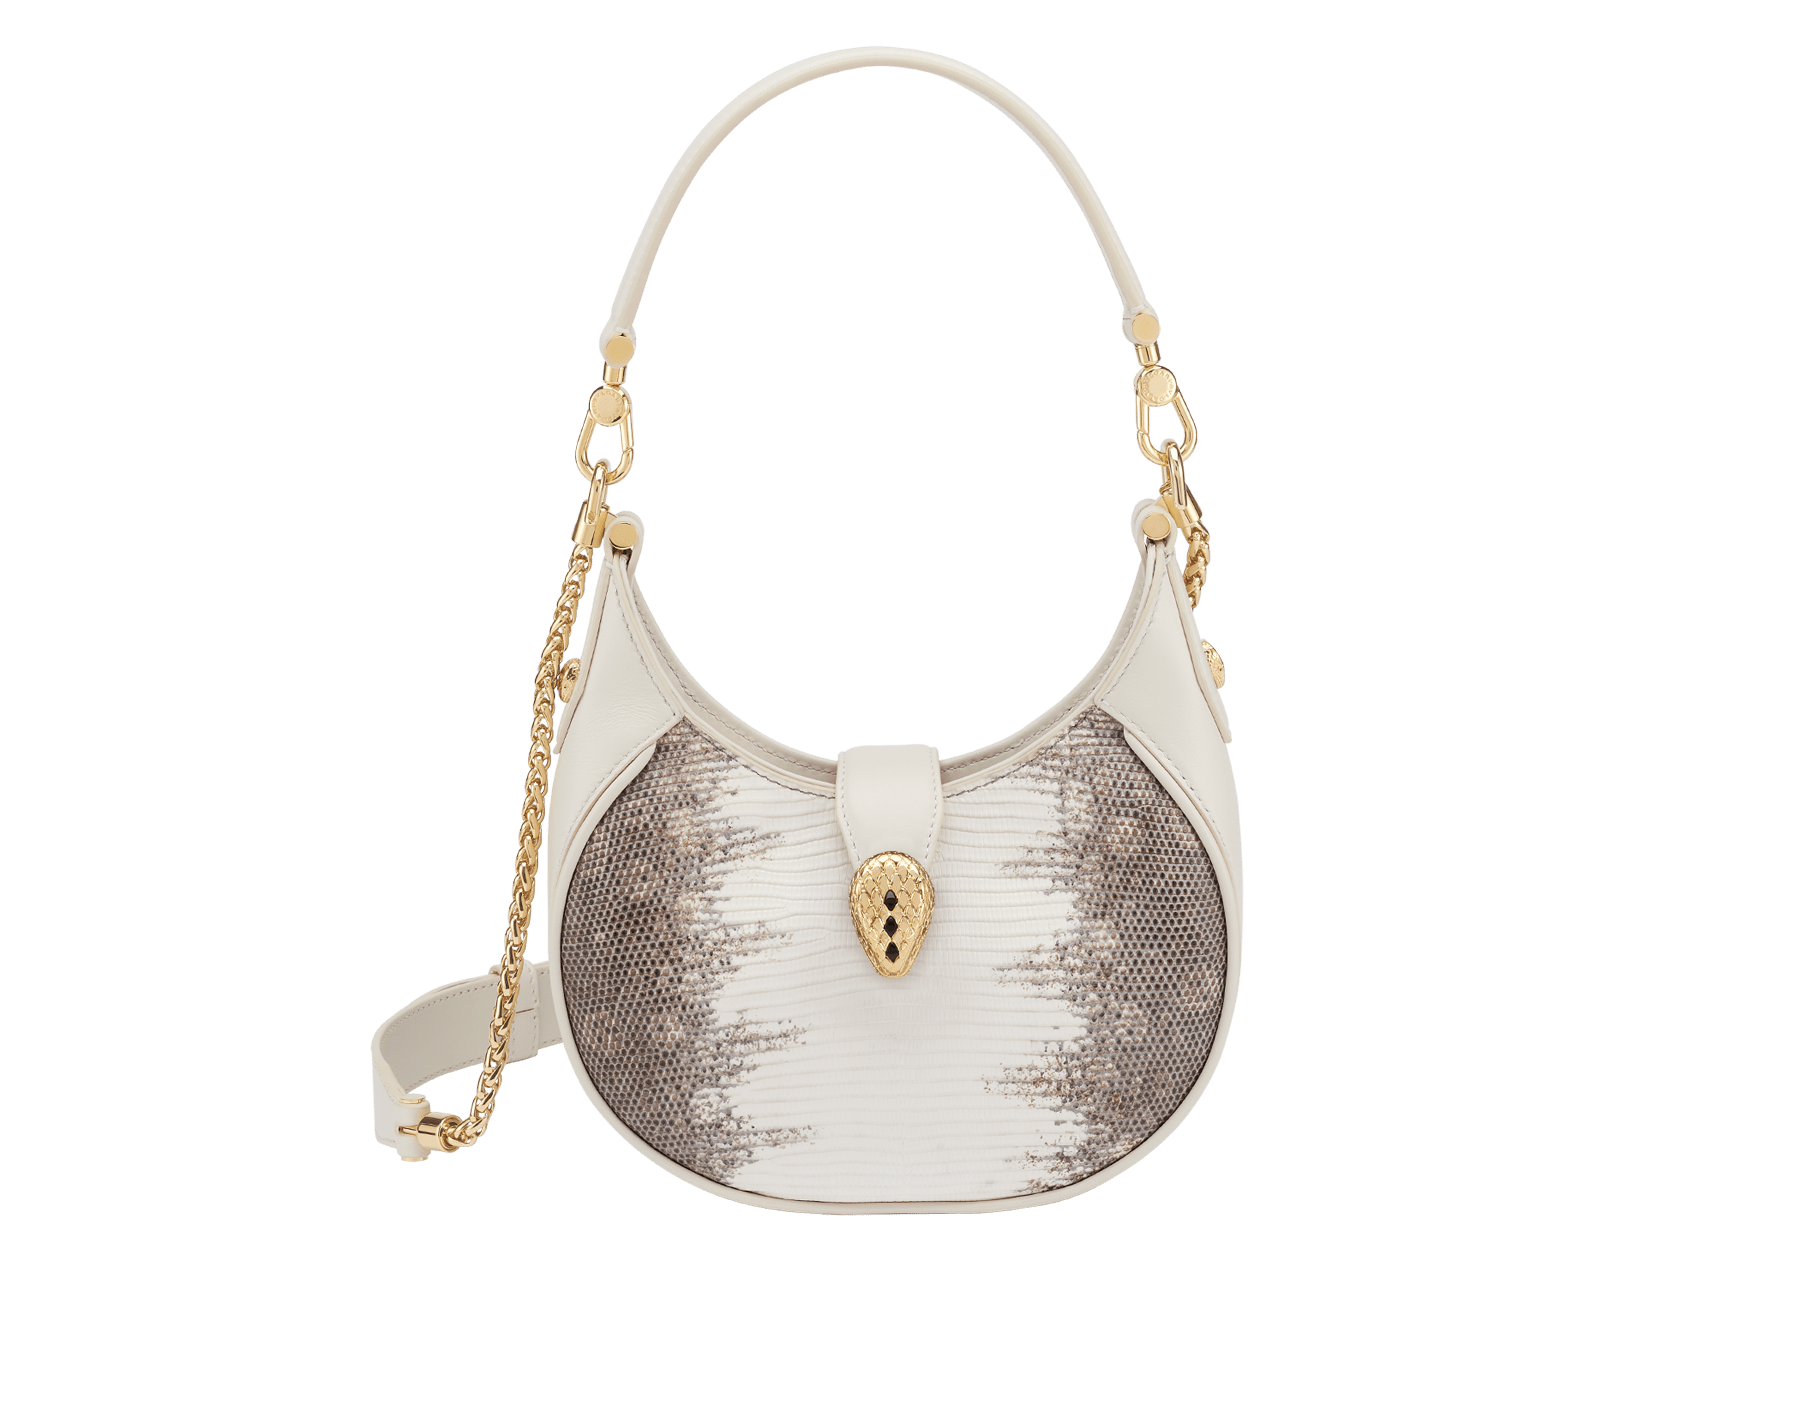 Serpenti Ellipse small crossbody bag in white agate shiny lizard skin with beige and grey shades, and with caramel topaz beige nappa leather lining. Captivating snakehead closure in gold-plated brass embellished with black onyx scales and red enamel eyes. 291738 image 1